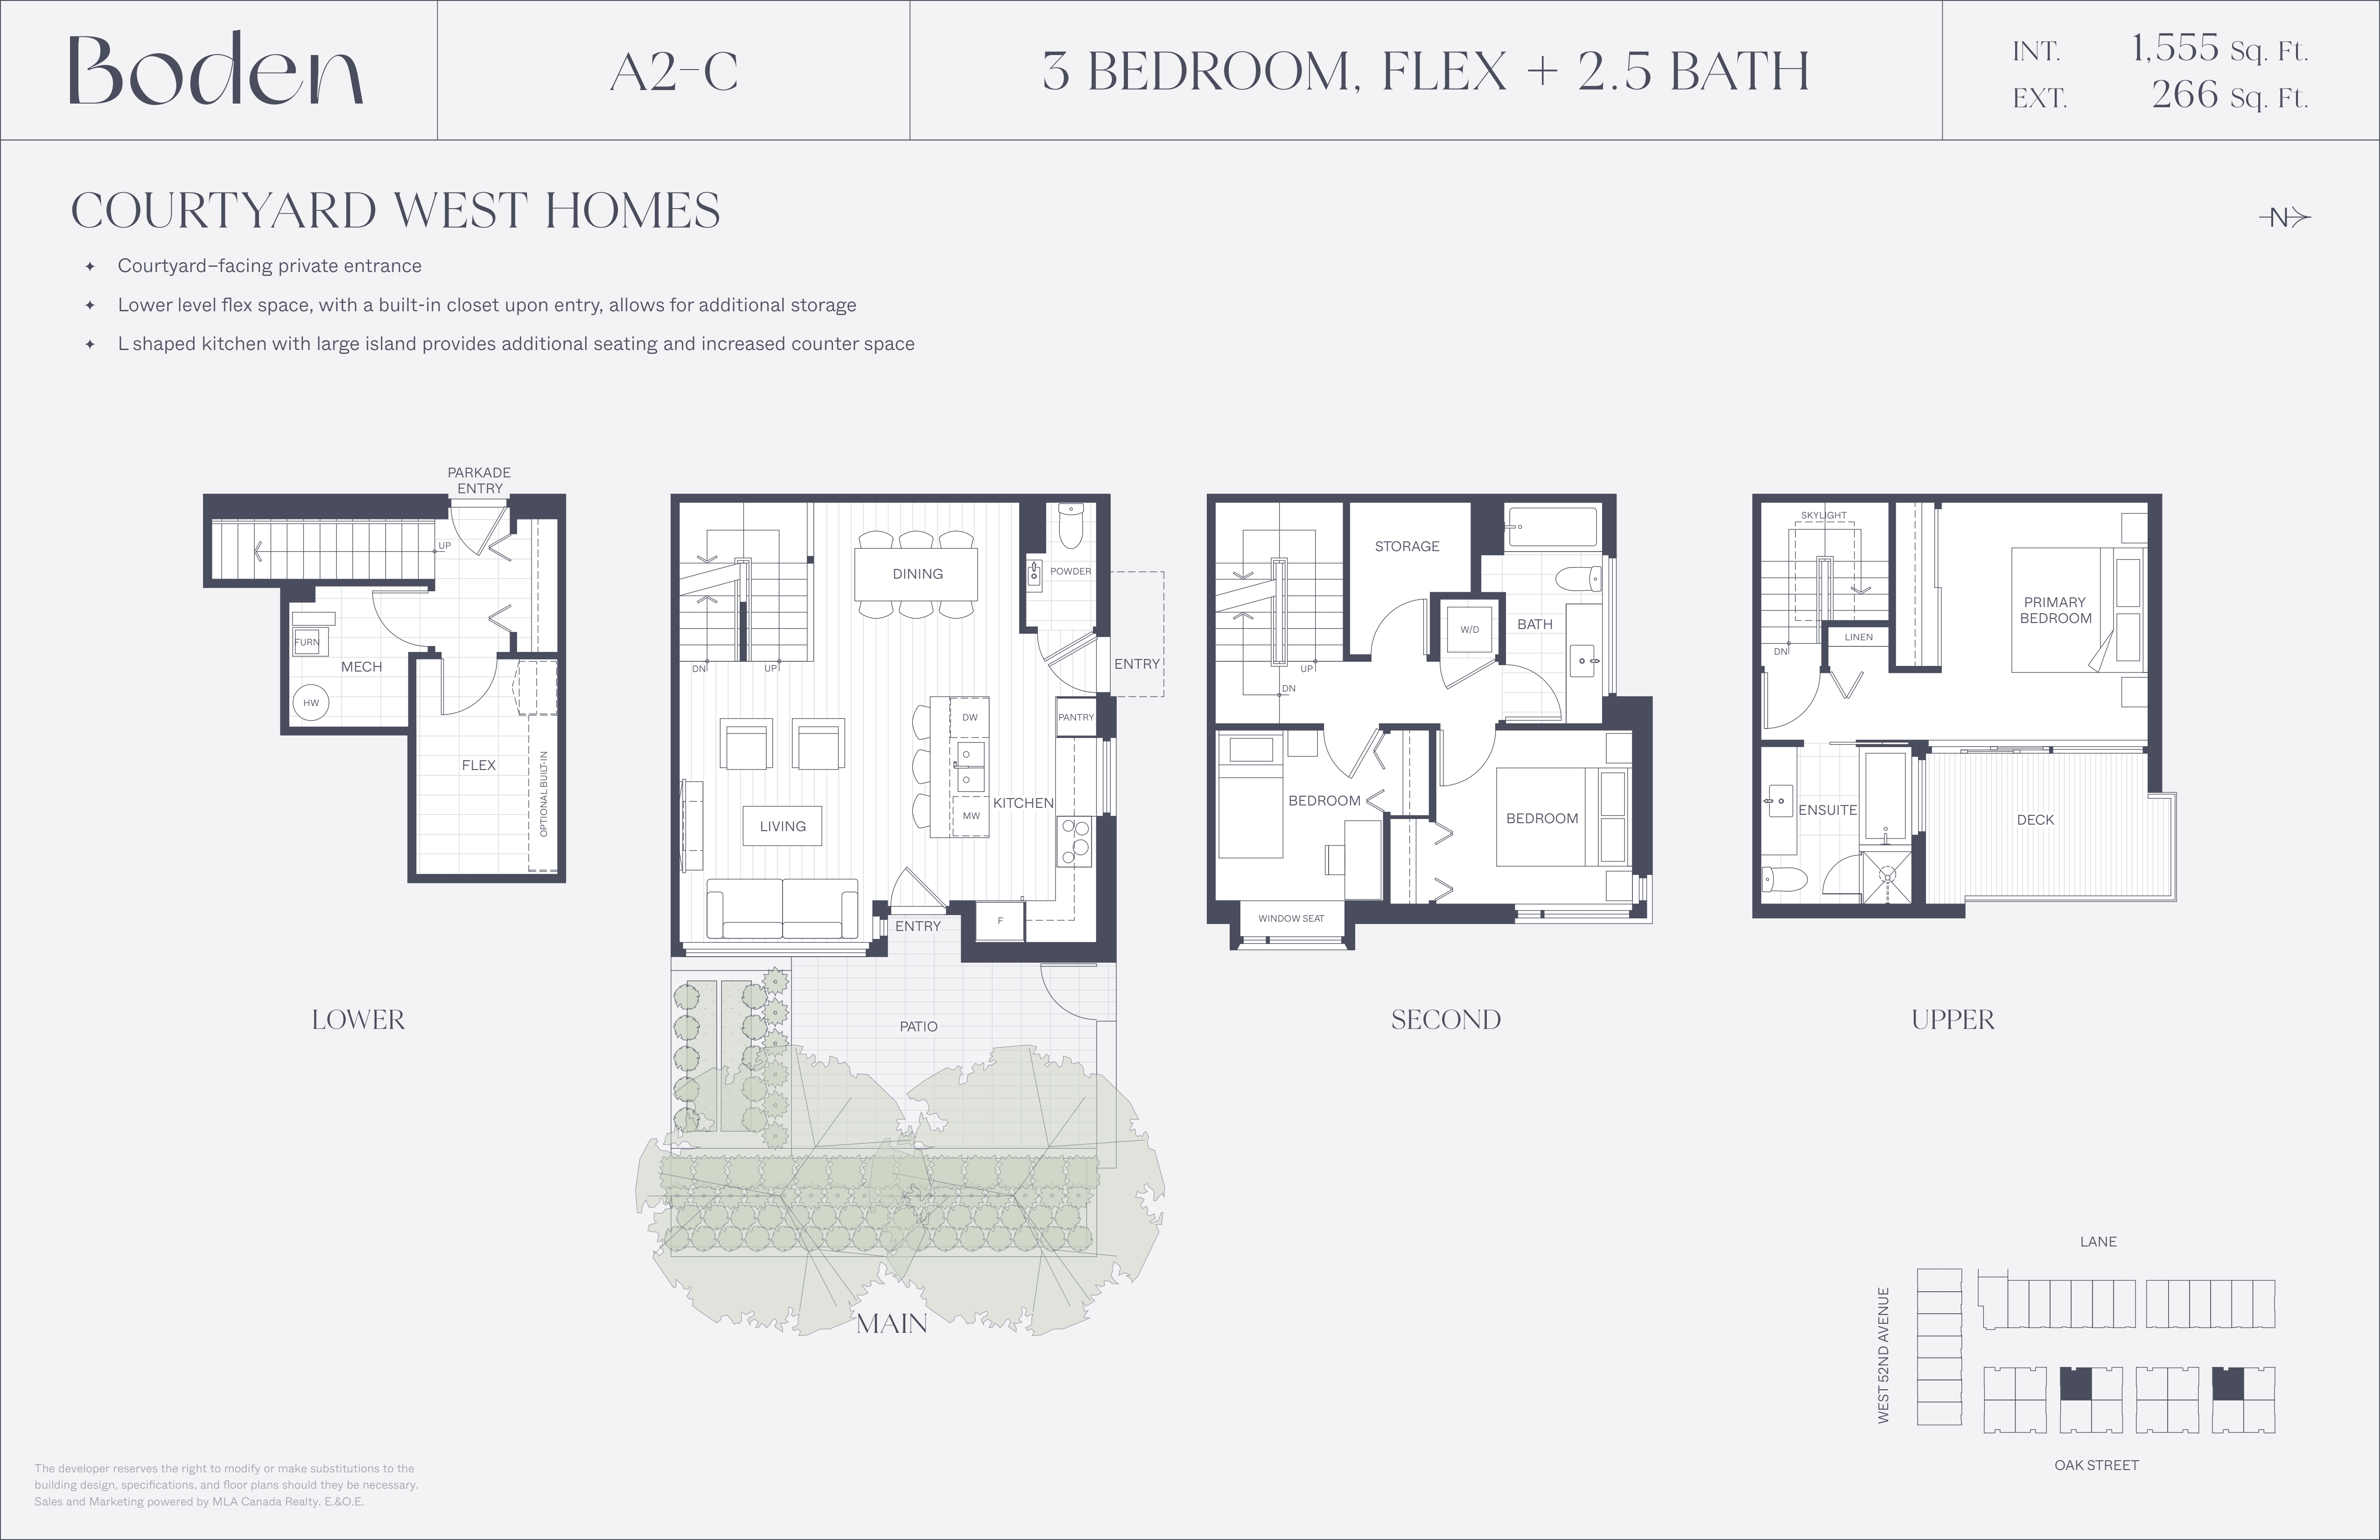  A2-C (Courtyard)  Floor Plan of Boden Towns with undefined beds